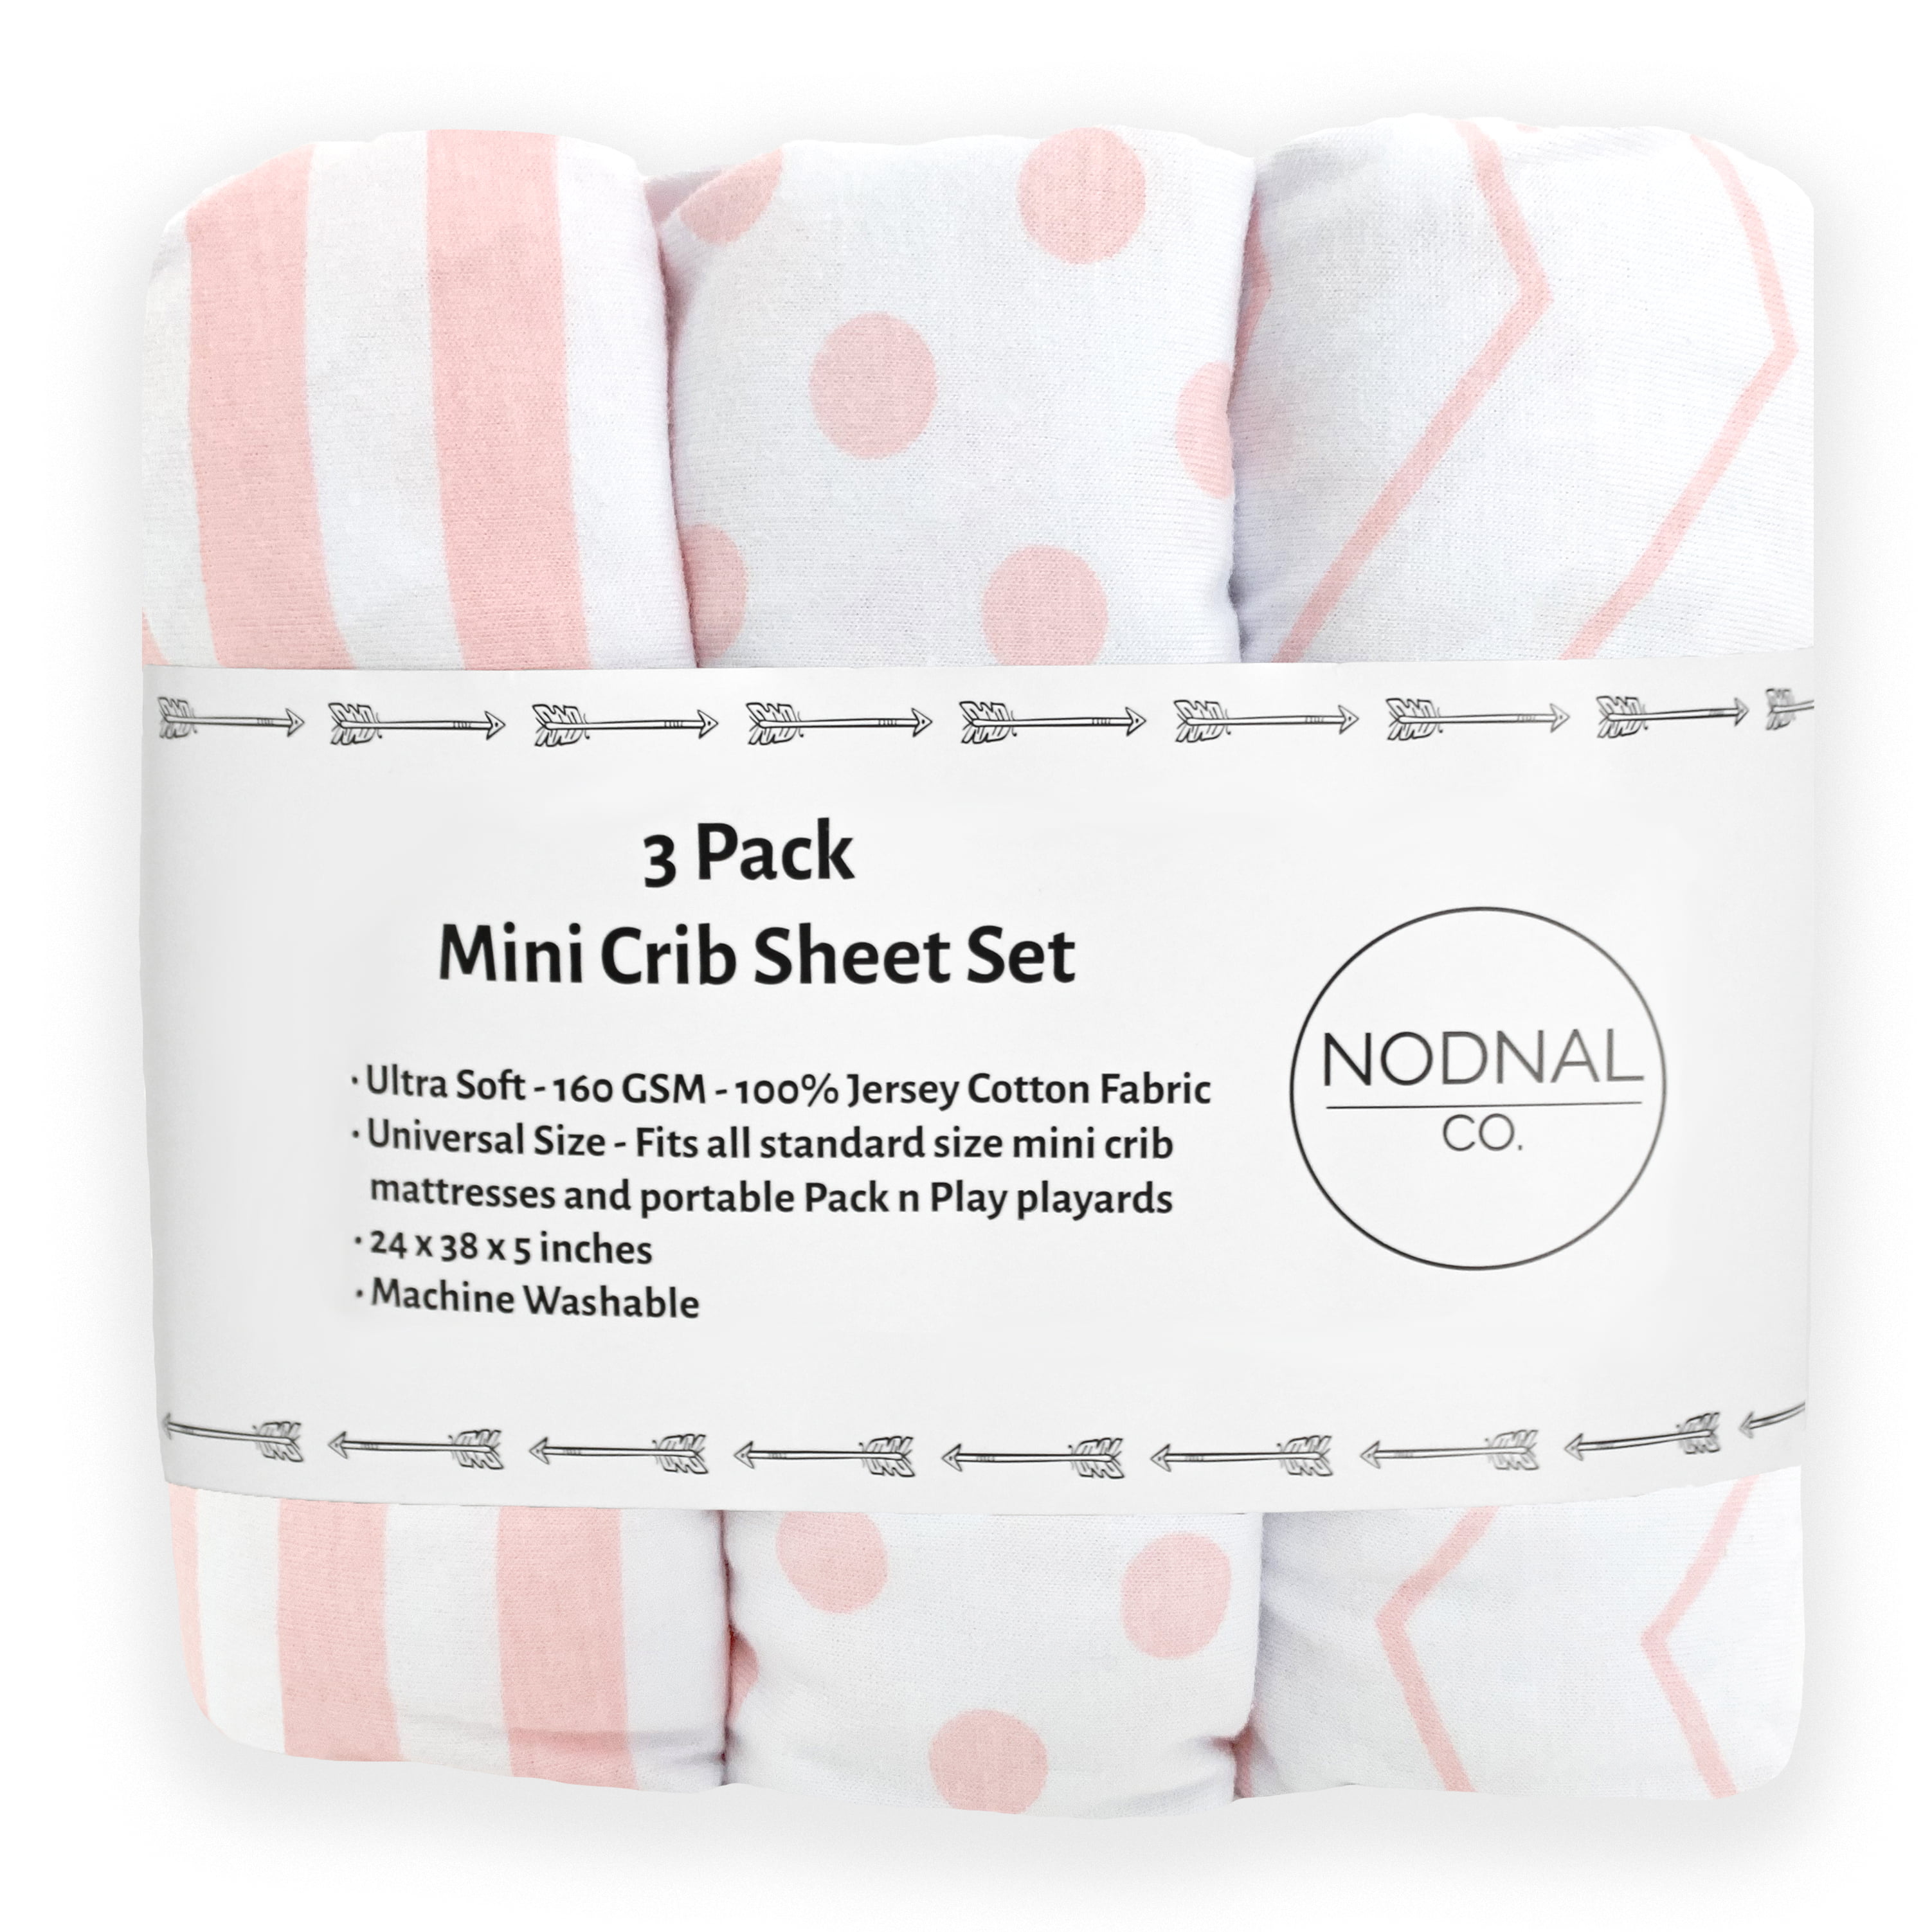 NODNAL CO Grey/White Chevron Polka Dot and Stripe 160 GSM Sheet Pack n Play Playard Portable Mini Crib Fitted Sheets Set 3 Pack 100% Jersey Knit Gray Cotton Pack and Play for Baby Girl/Boy Playpen